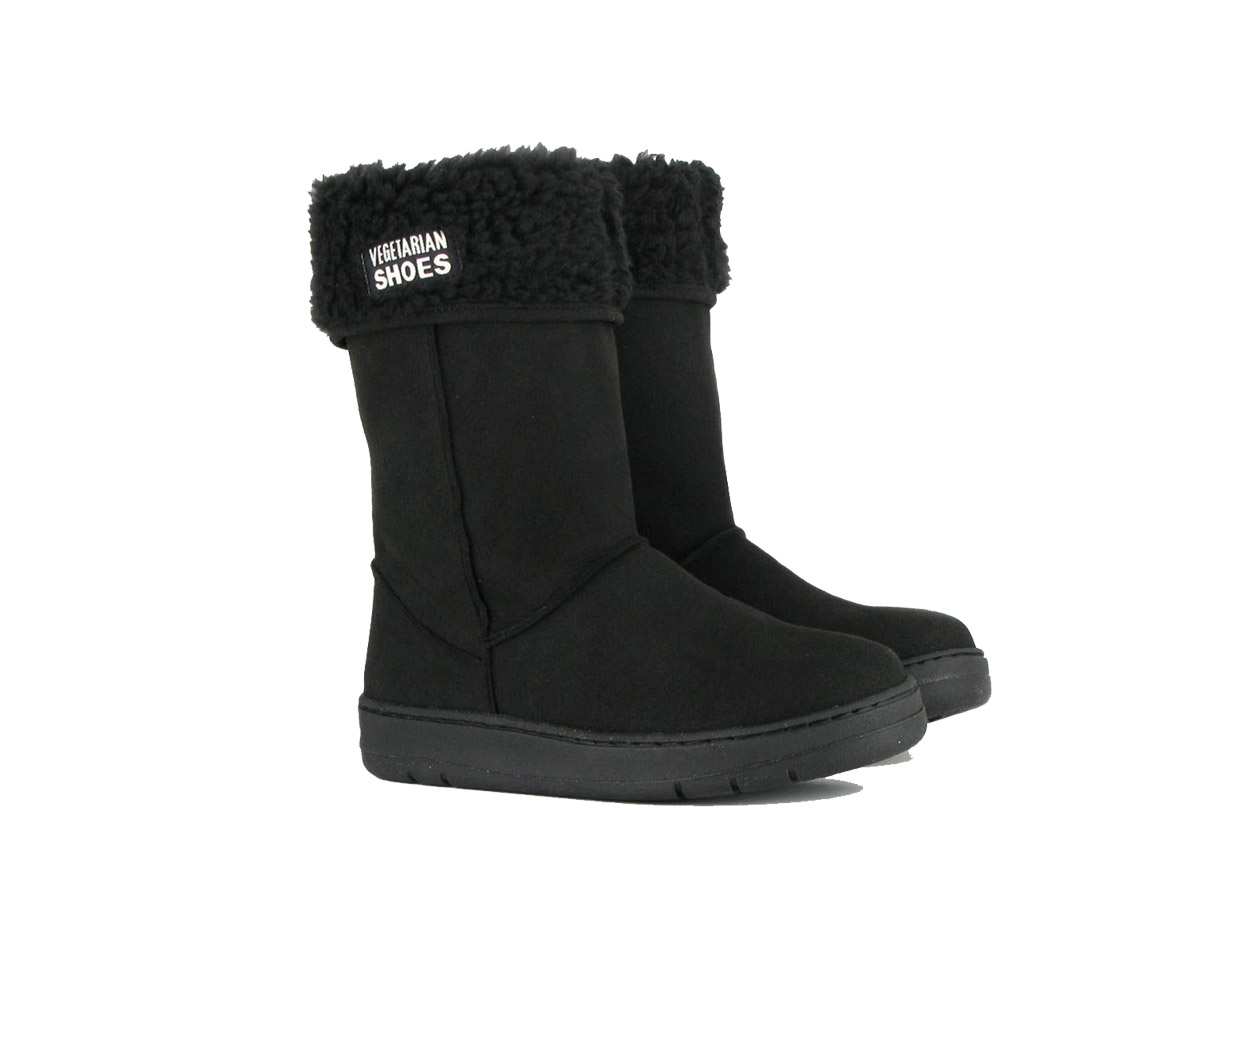 Chaussure femme Highly Snug Boot